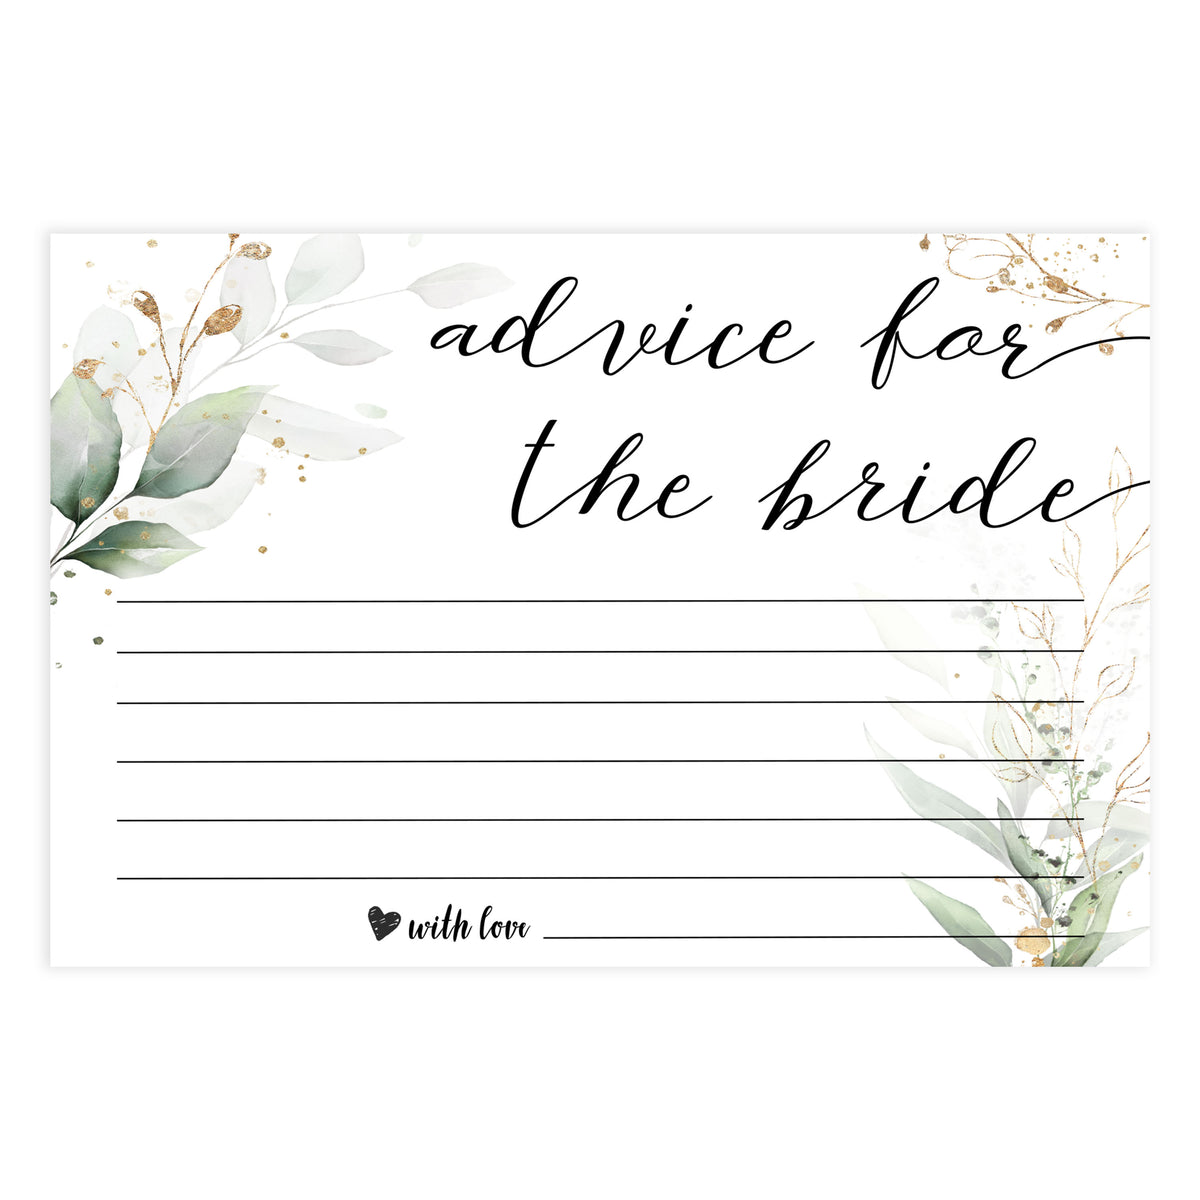 advice for the bride, bride advice, Printable bridal shower games, greenery bridal shower, gold leaf bridal shower games, fun bridal shower games, bridal shower game ideas, greenery bridal shower